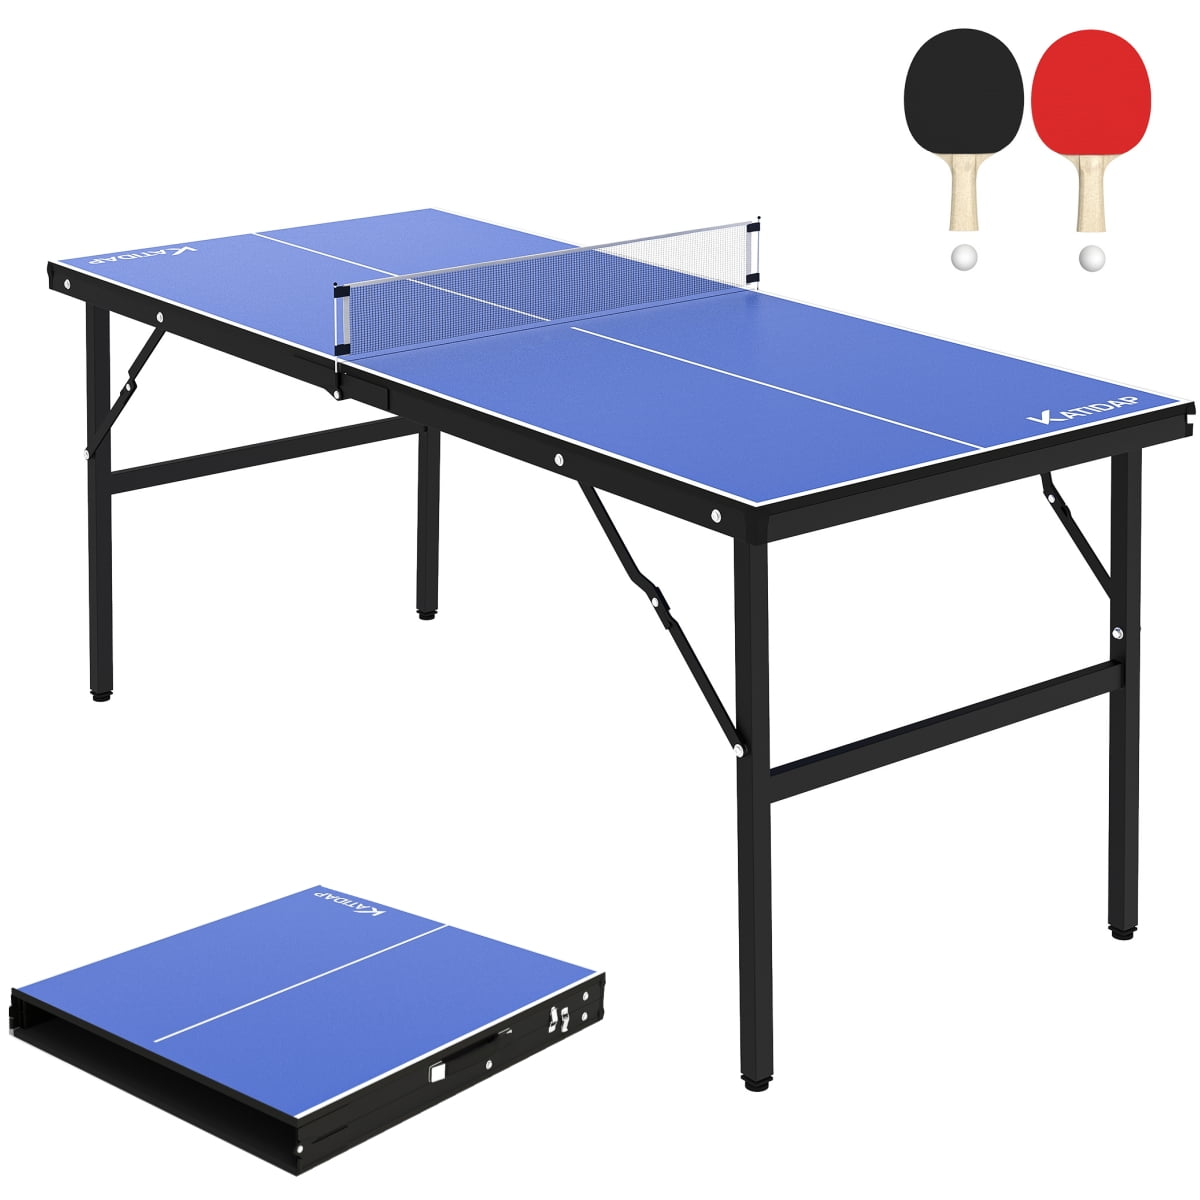 Portable Table Tennis Table, Mid Size Indoor Outdoor Foldable Ping Pong Table with Net